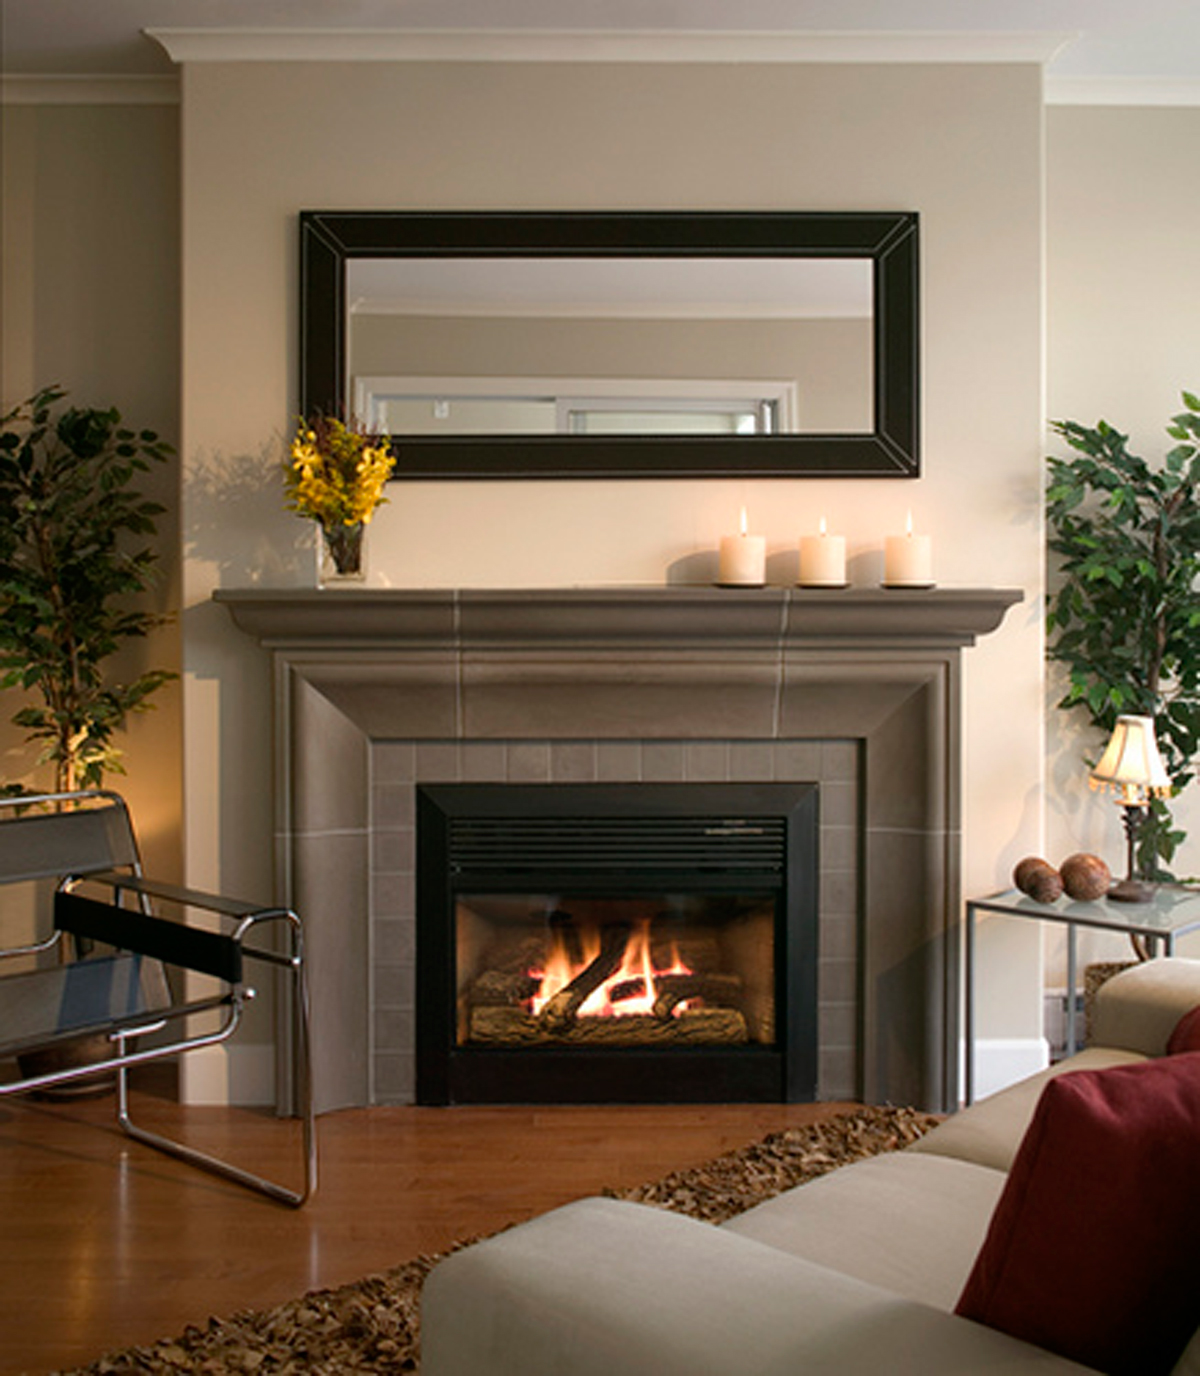 Get to Know the Three Most Common Types of Fireplace Doors